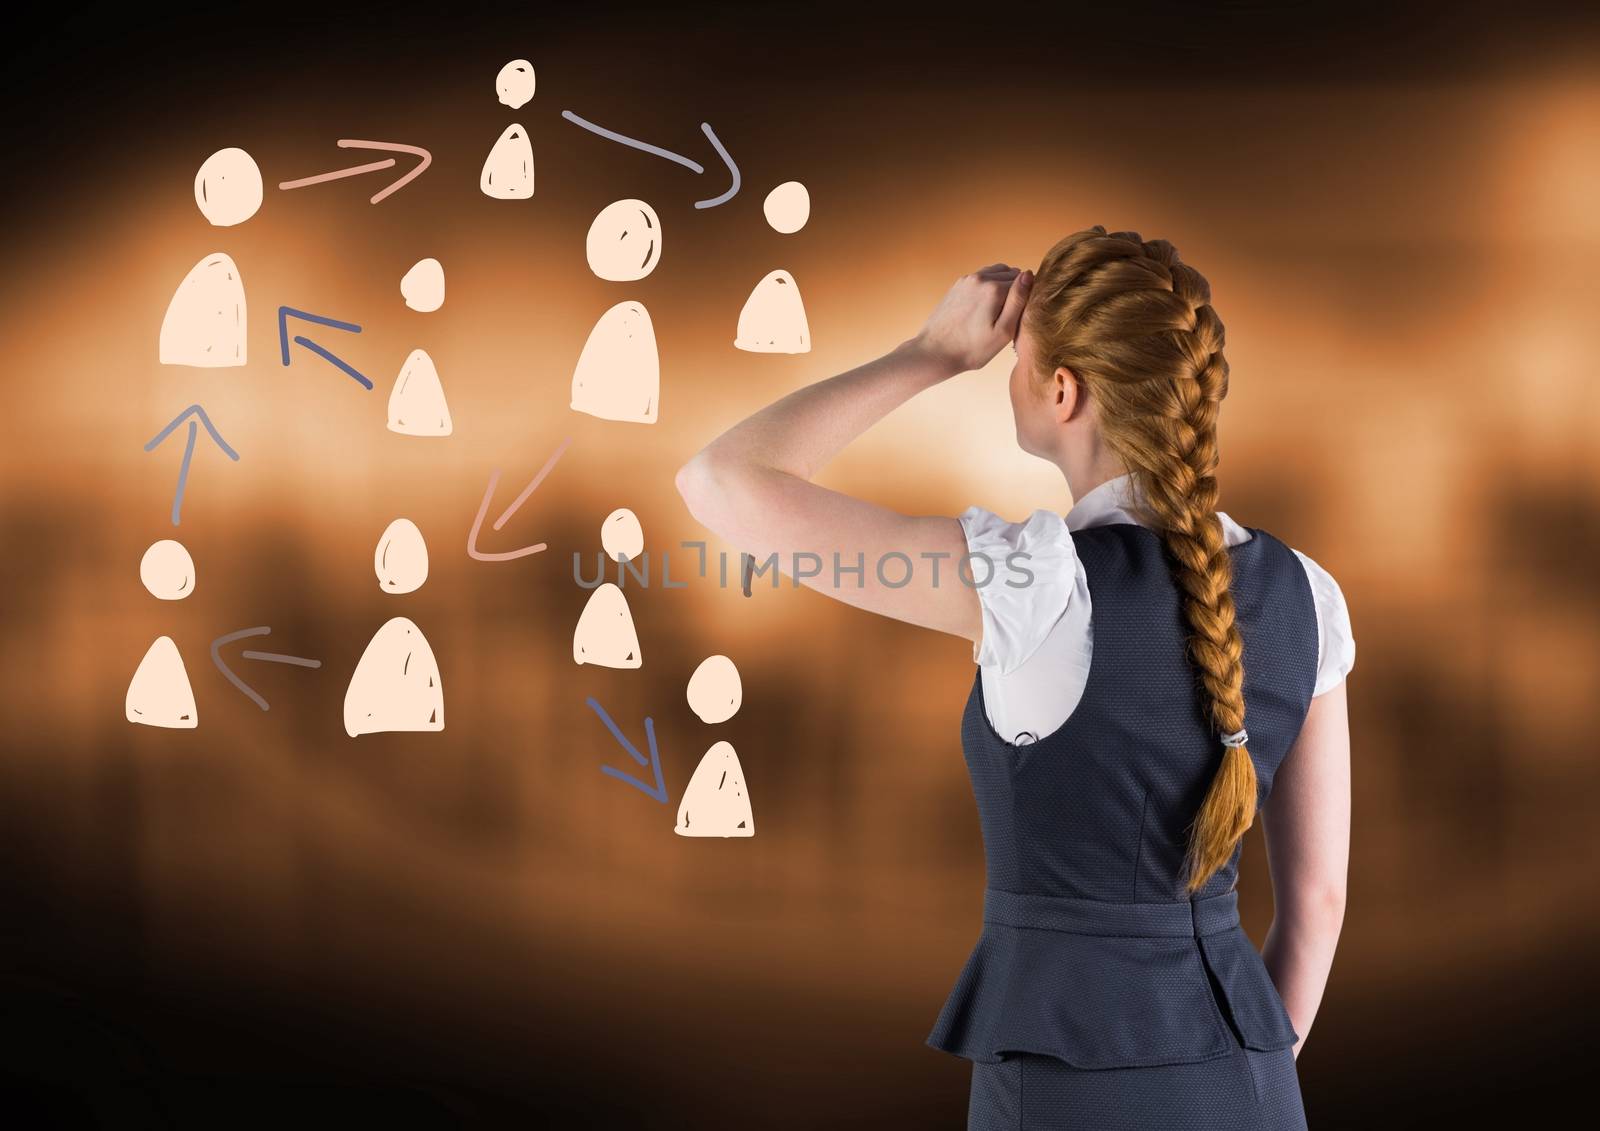 Digital composite of Hand-drawn people profile icons with businesswoman